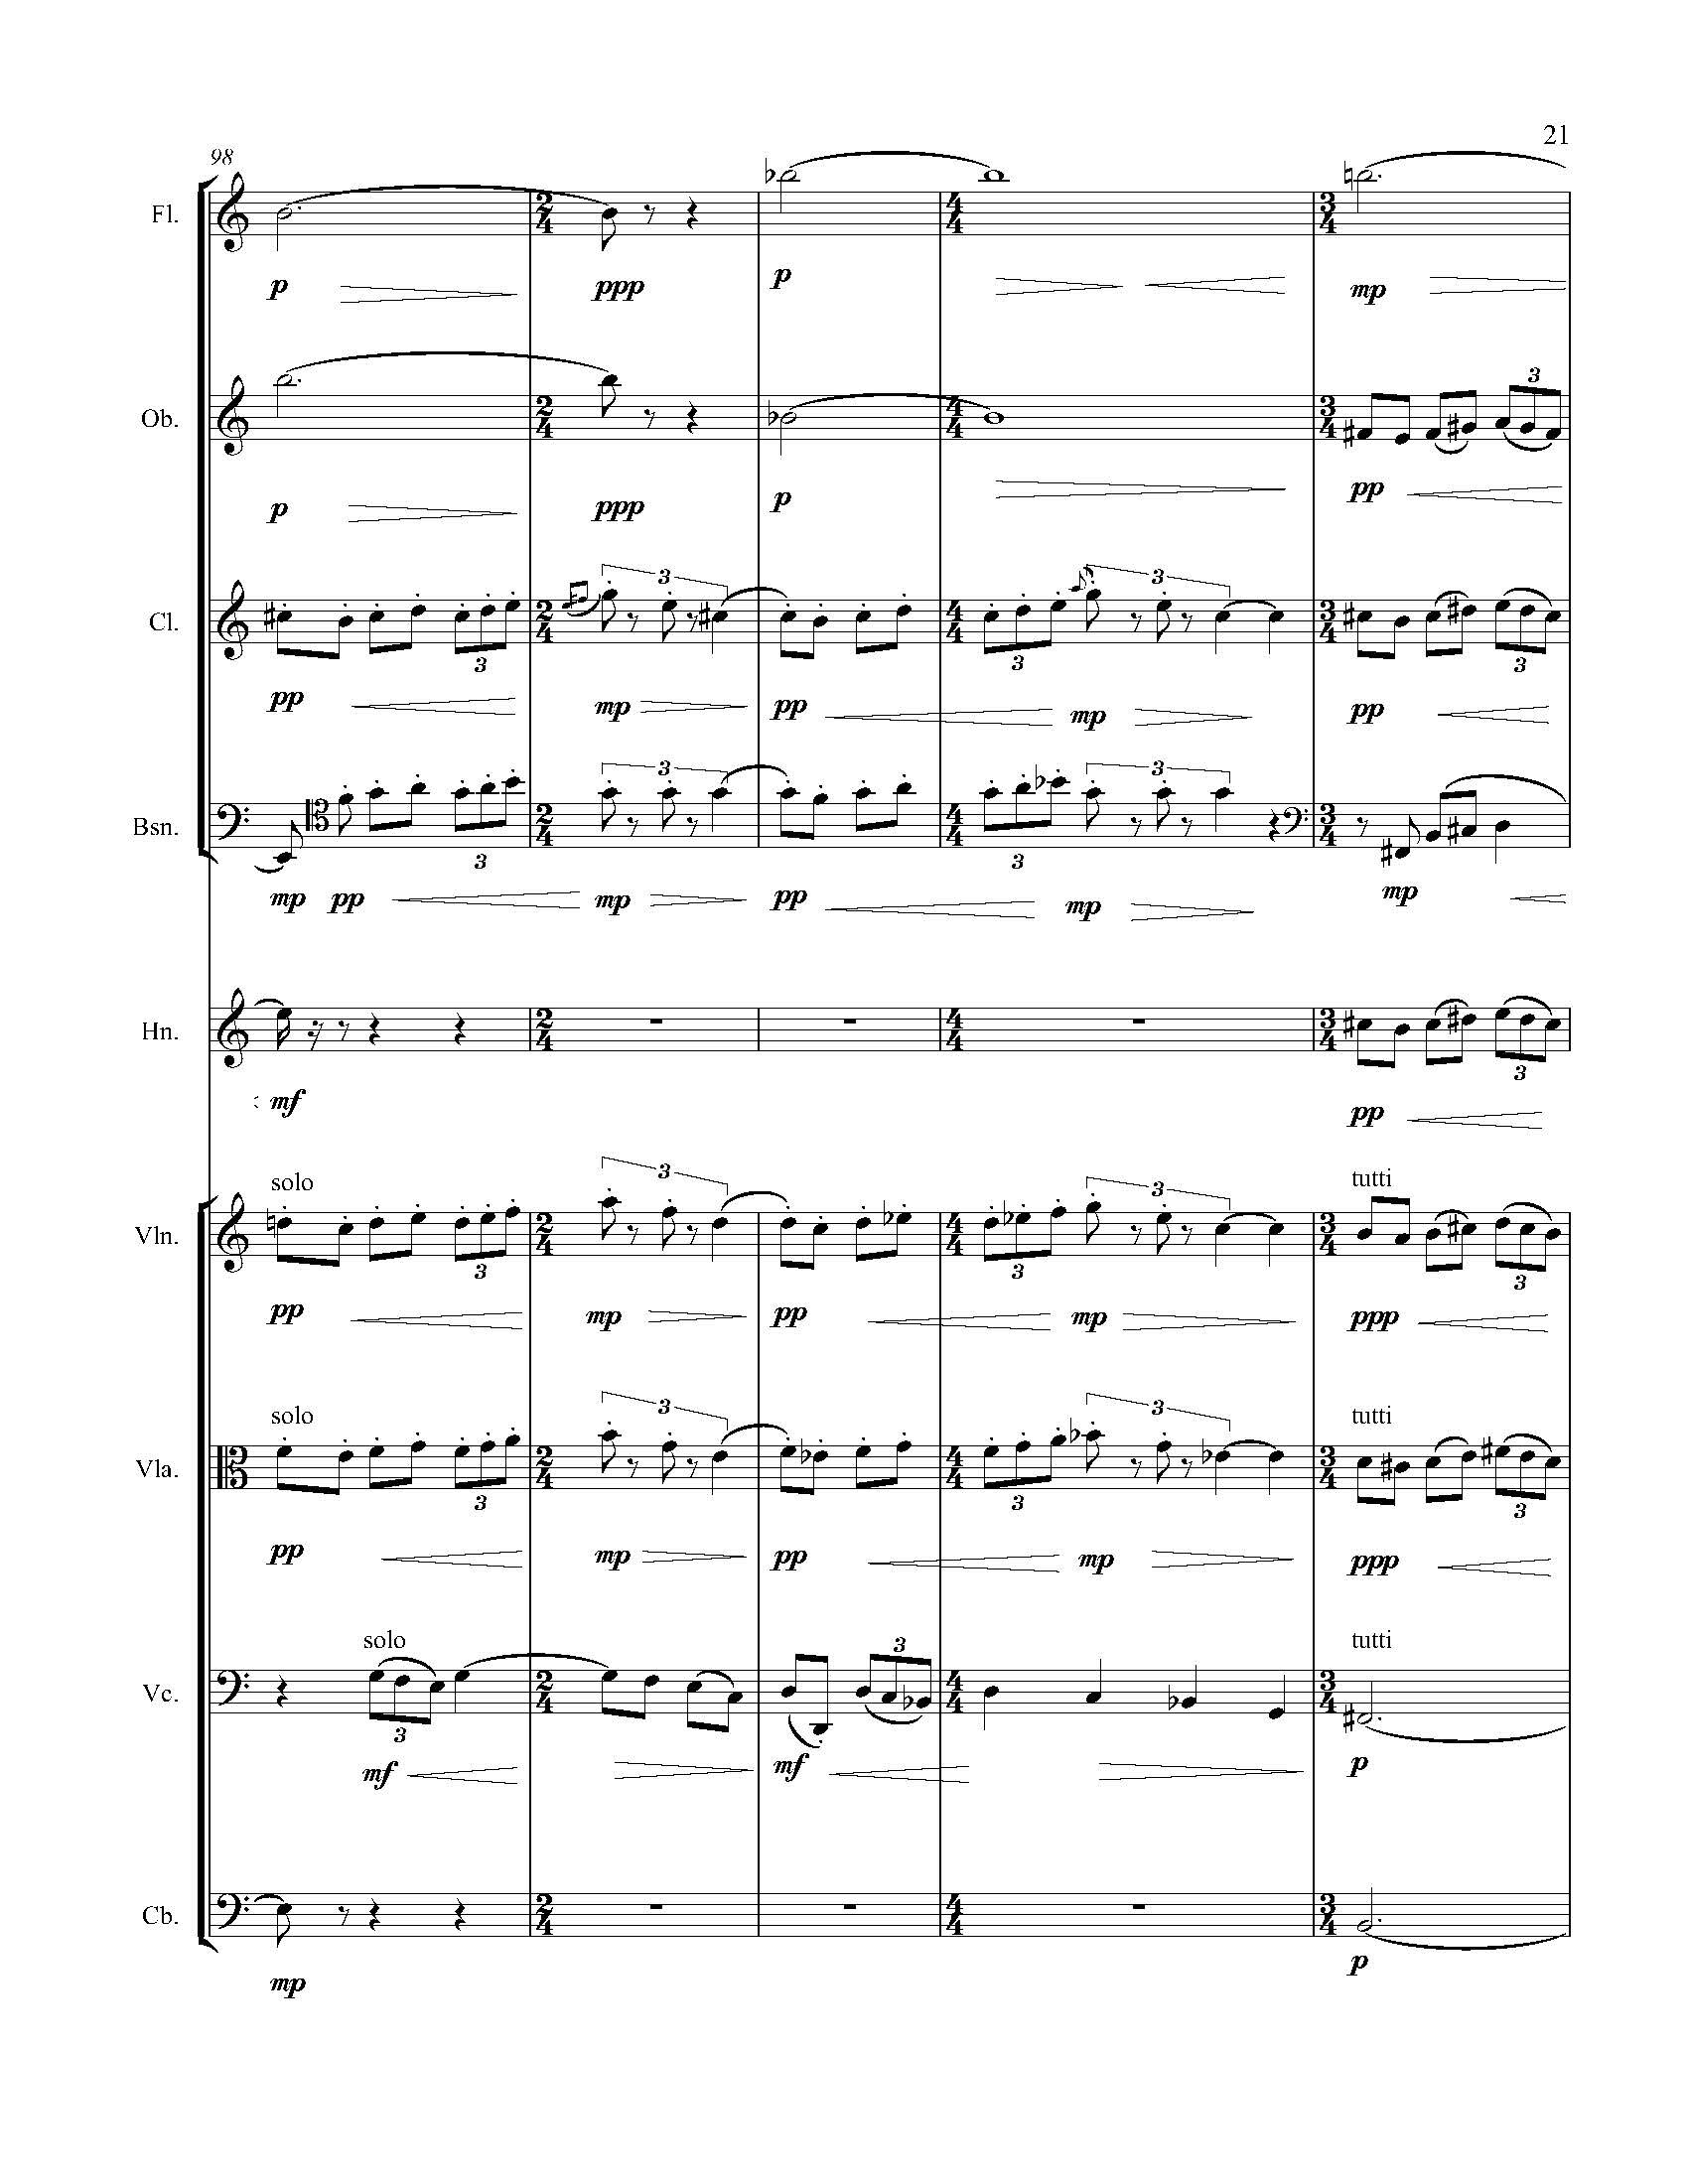 In Search of a Bird - Complete Score_Page_27.jpg